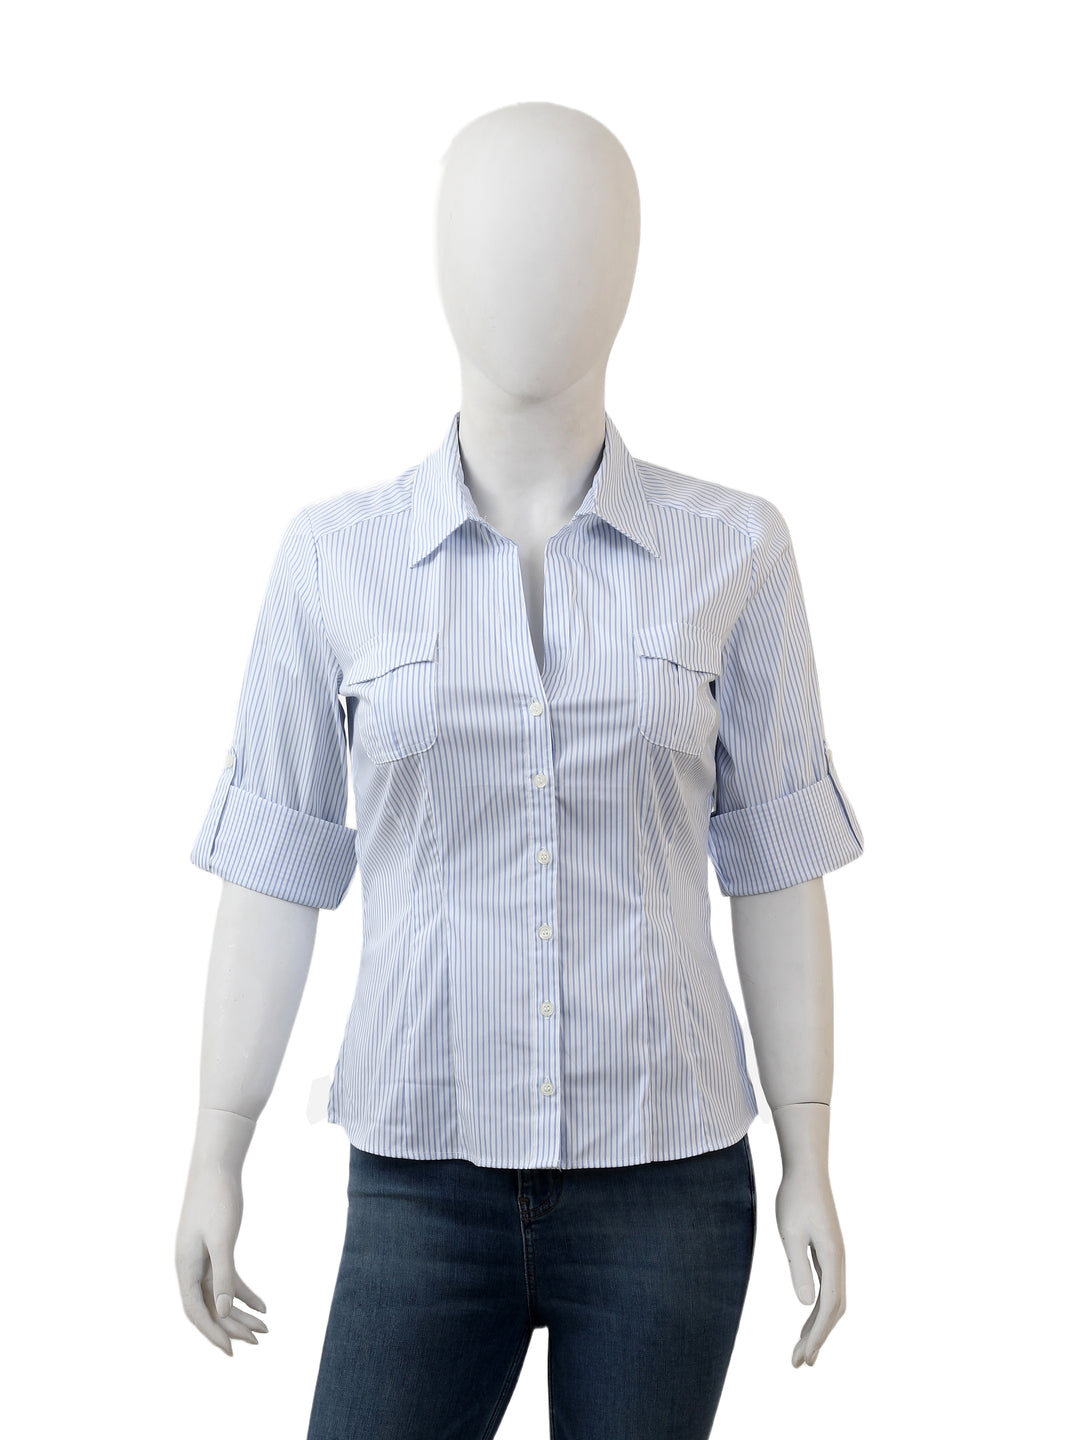 H&M Casual 3QTR Lining Shirt With Front 2 Pockets